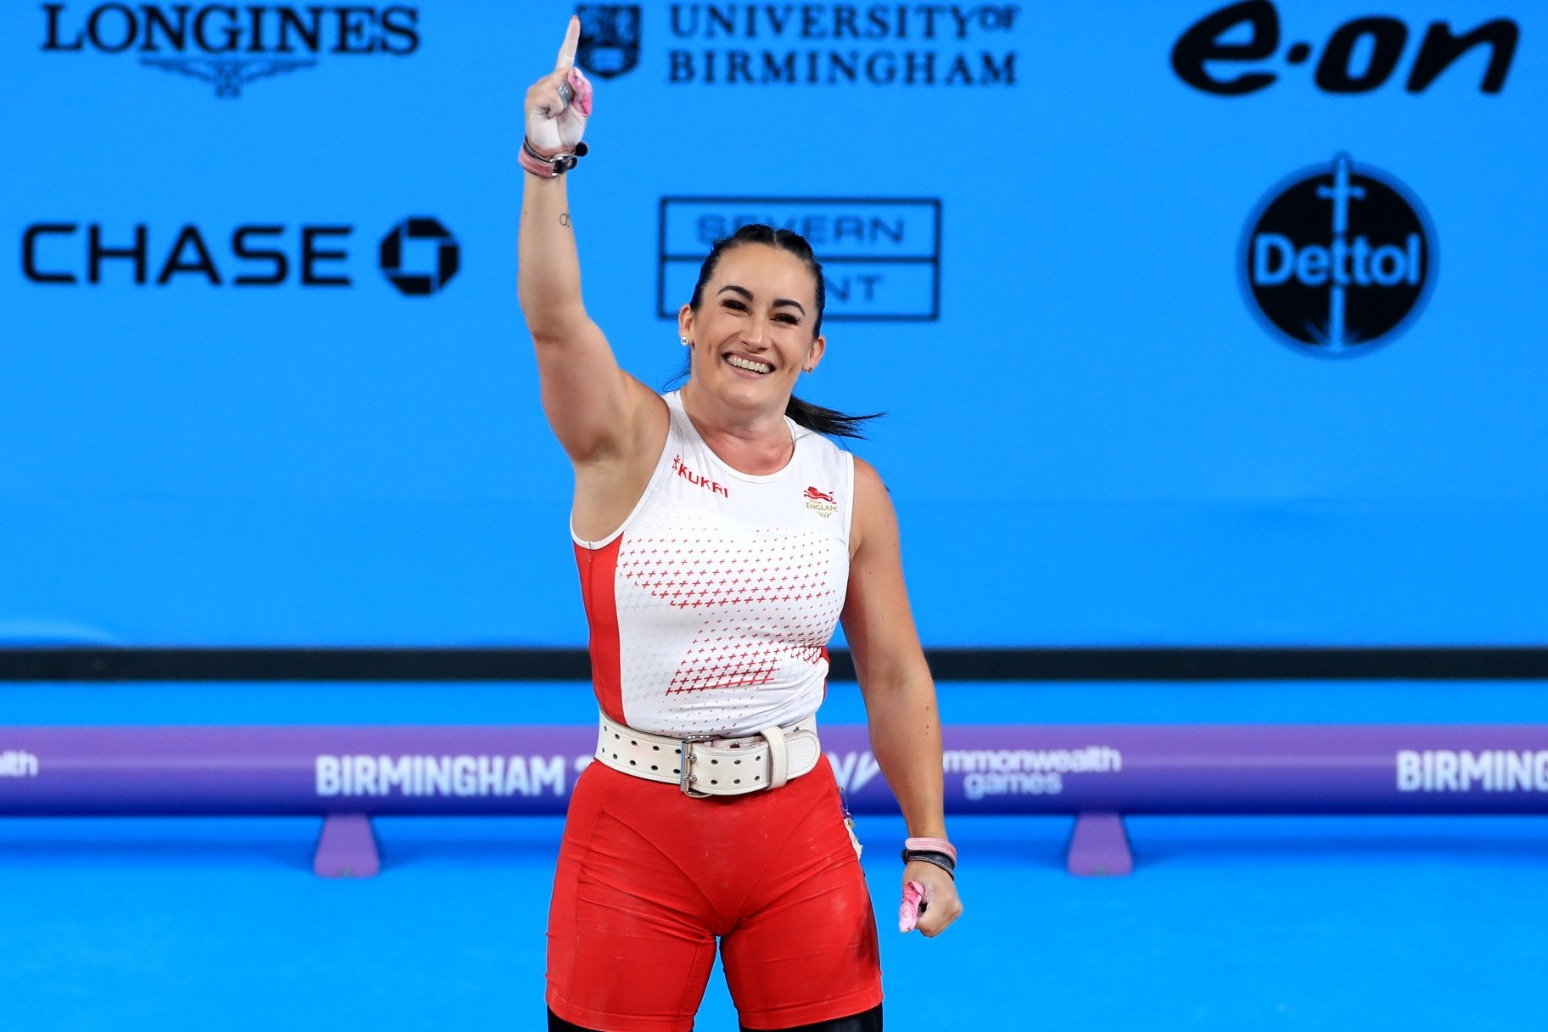 Sarah Davies emerges from ‘tough’ period to win weightlifting gold in Birmingham 